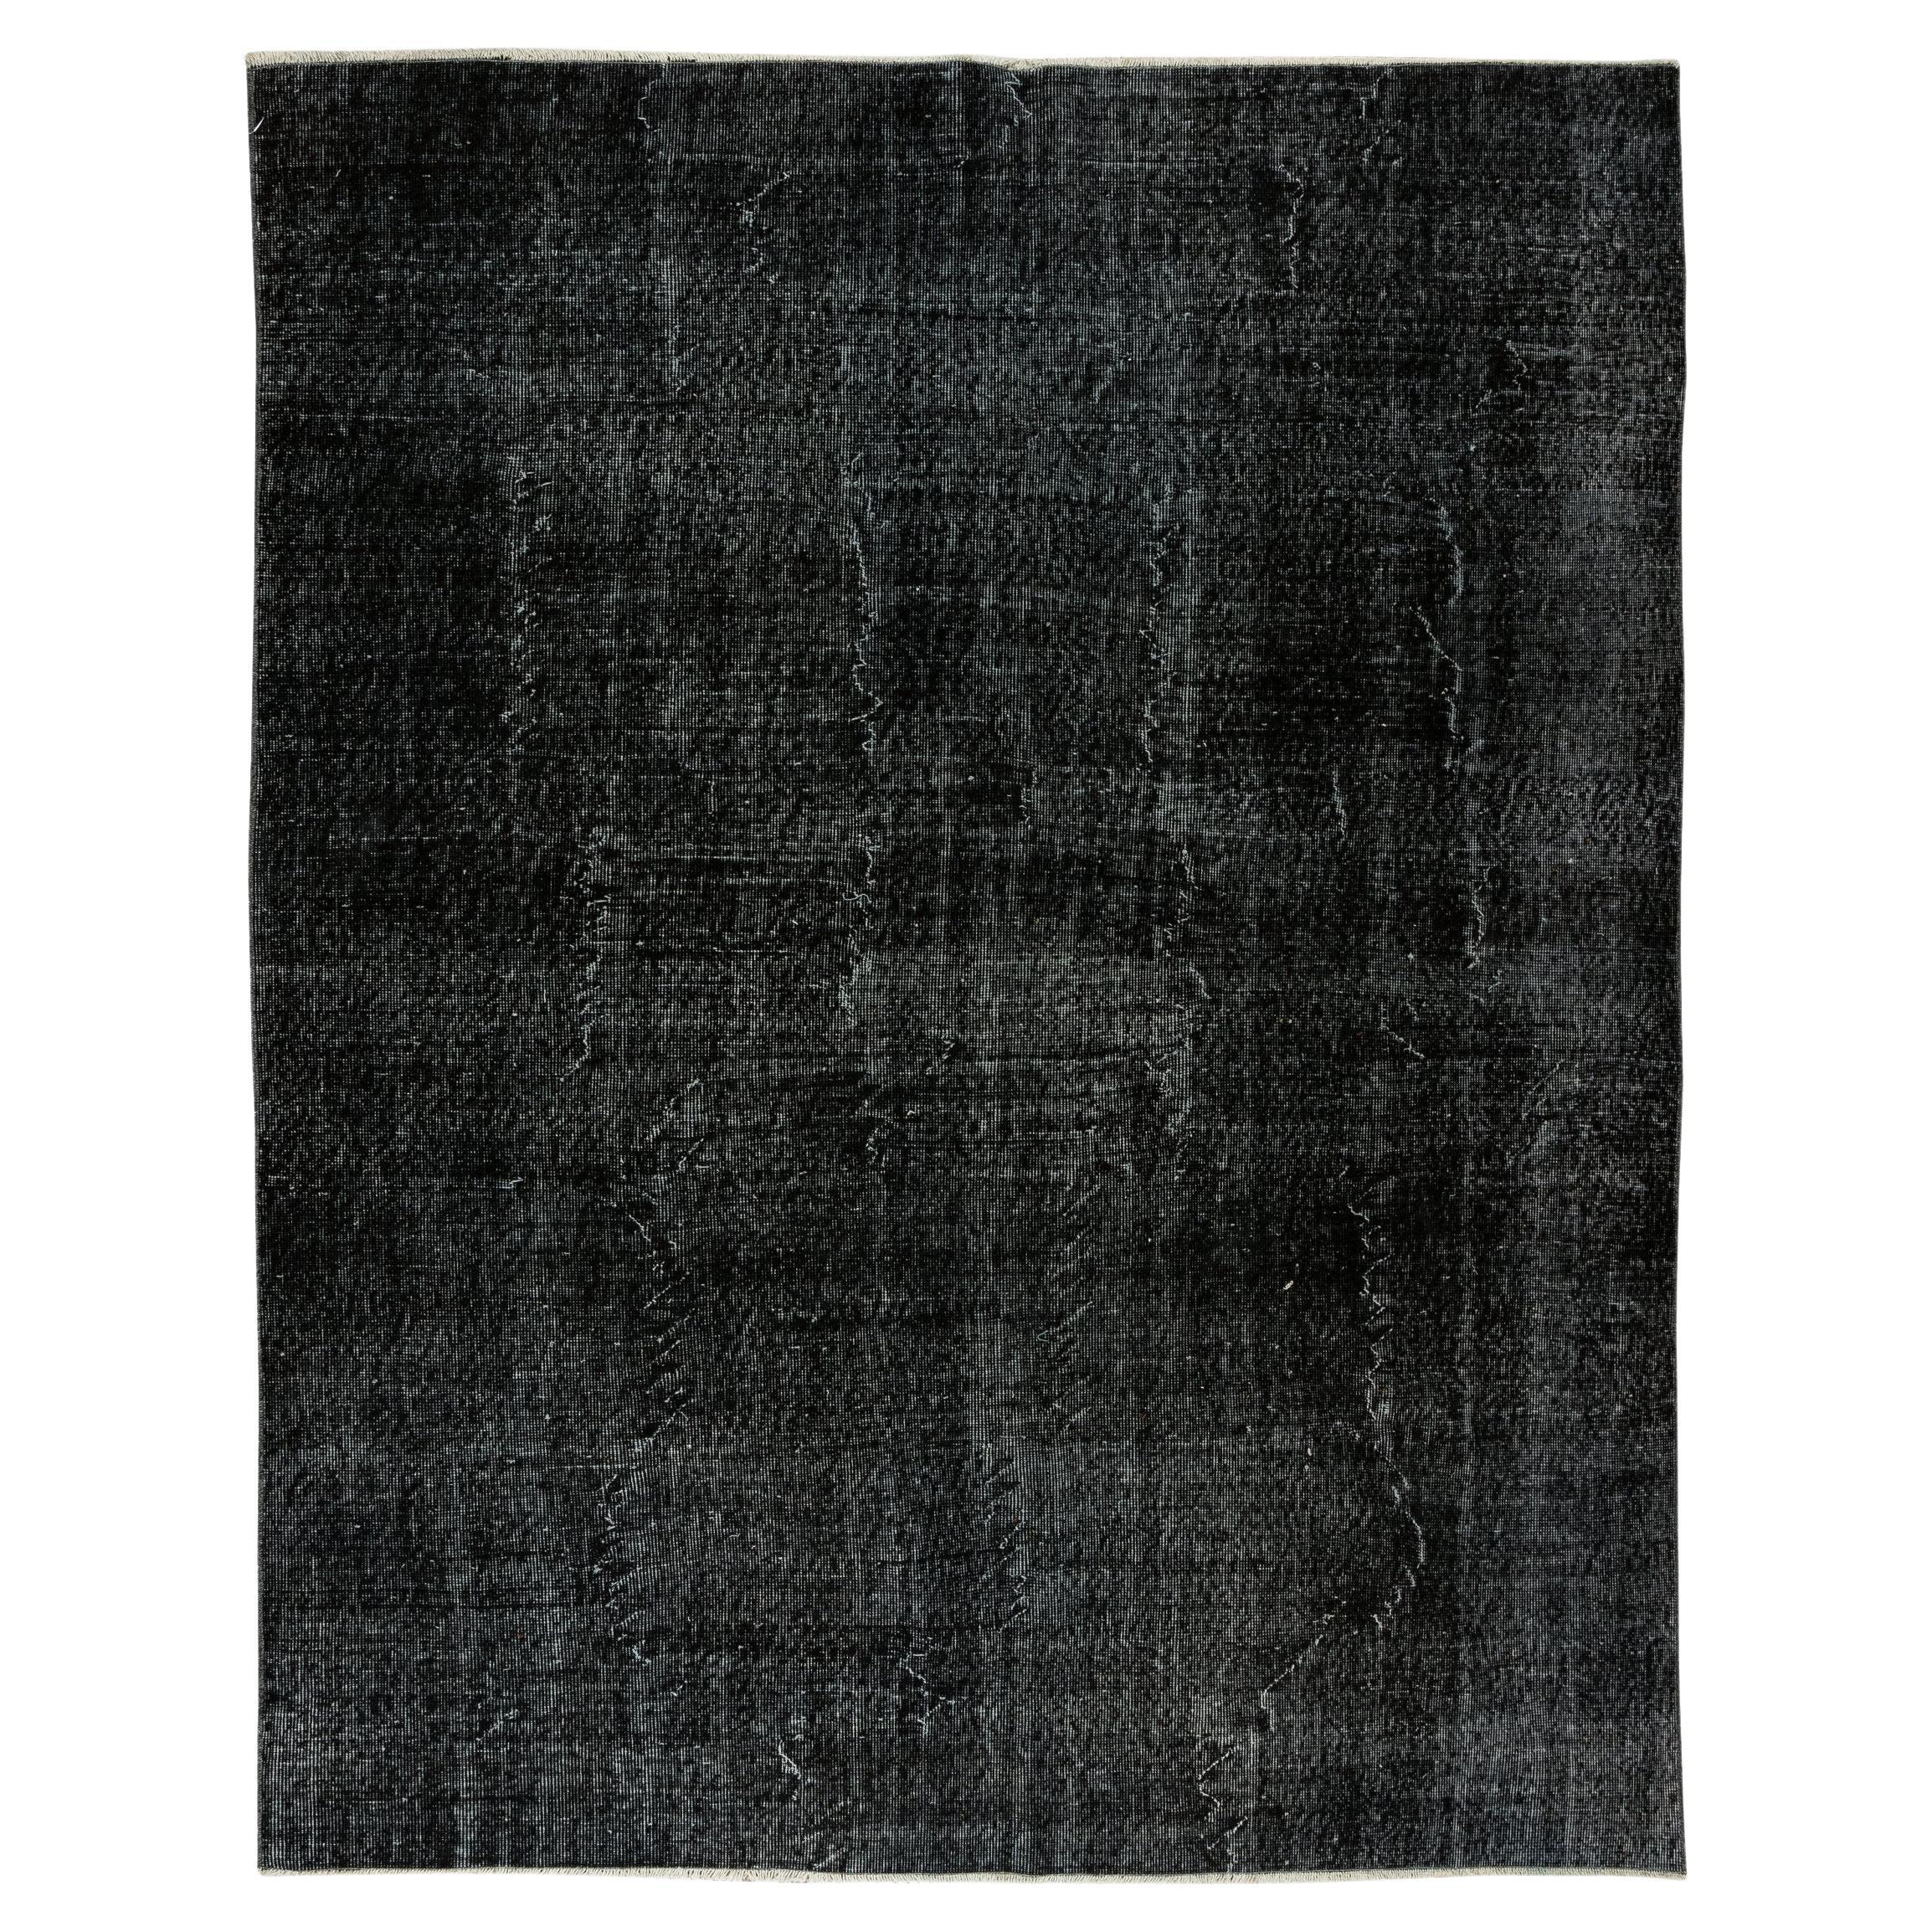 6.8x8.4 Ft Hand-Knotted Vintage Turkish Rug in Solid Black for Modern Homes